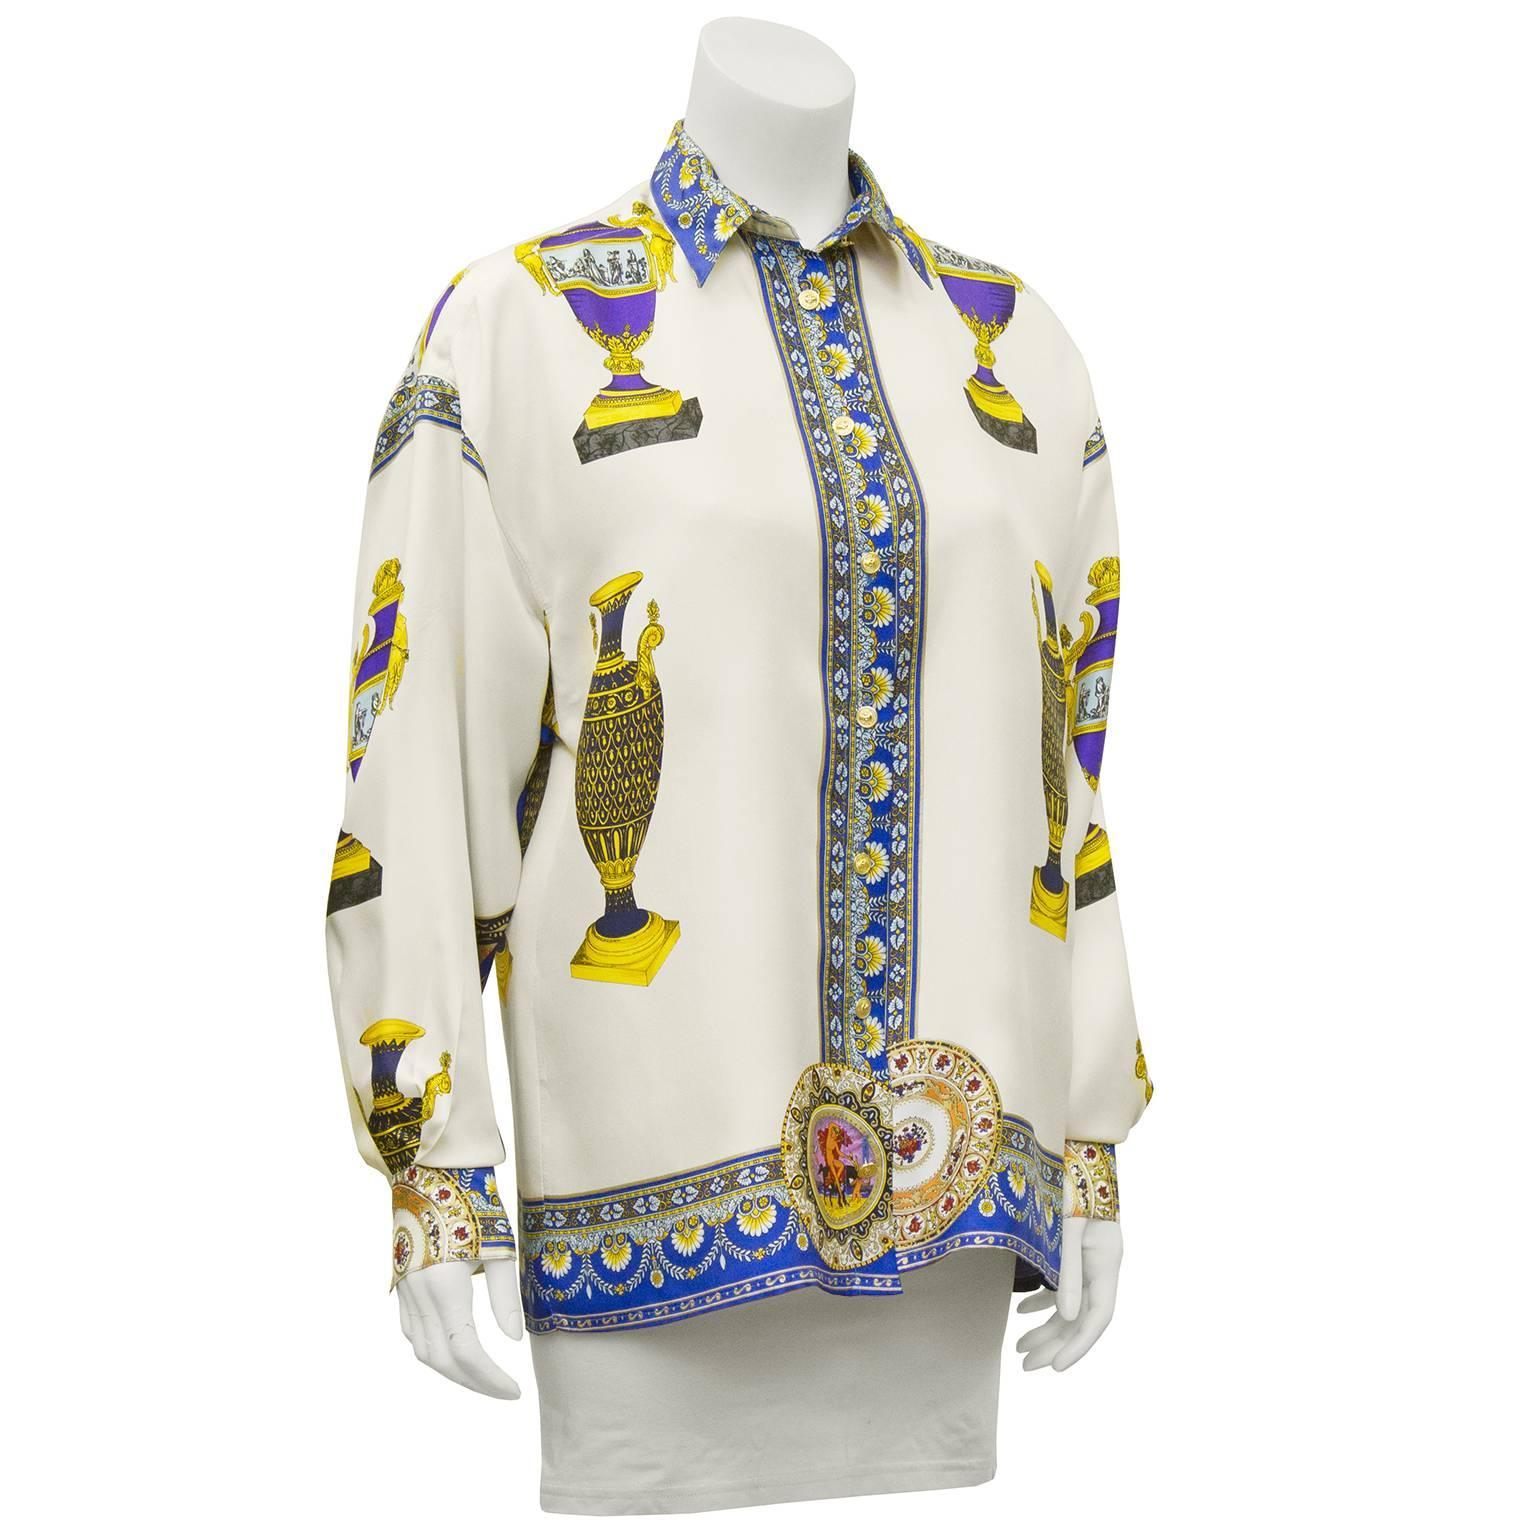 Stunning Versus by Gianni Versace silk ladies shirt with button front, collar and cuffs. A look that defined Versace in the early years, luxury fabrics printed with opulent designs in jewel tones and neo classical images. In excellent condition fits